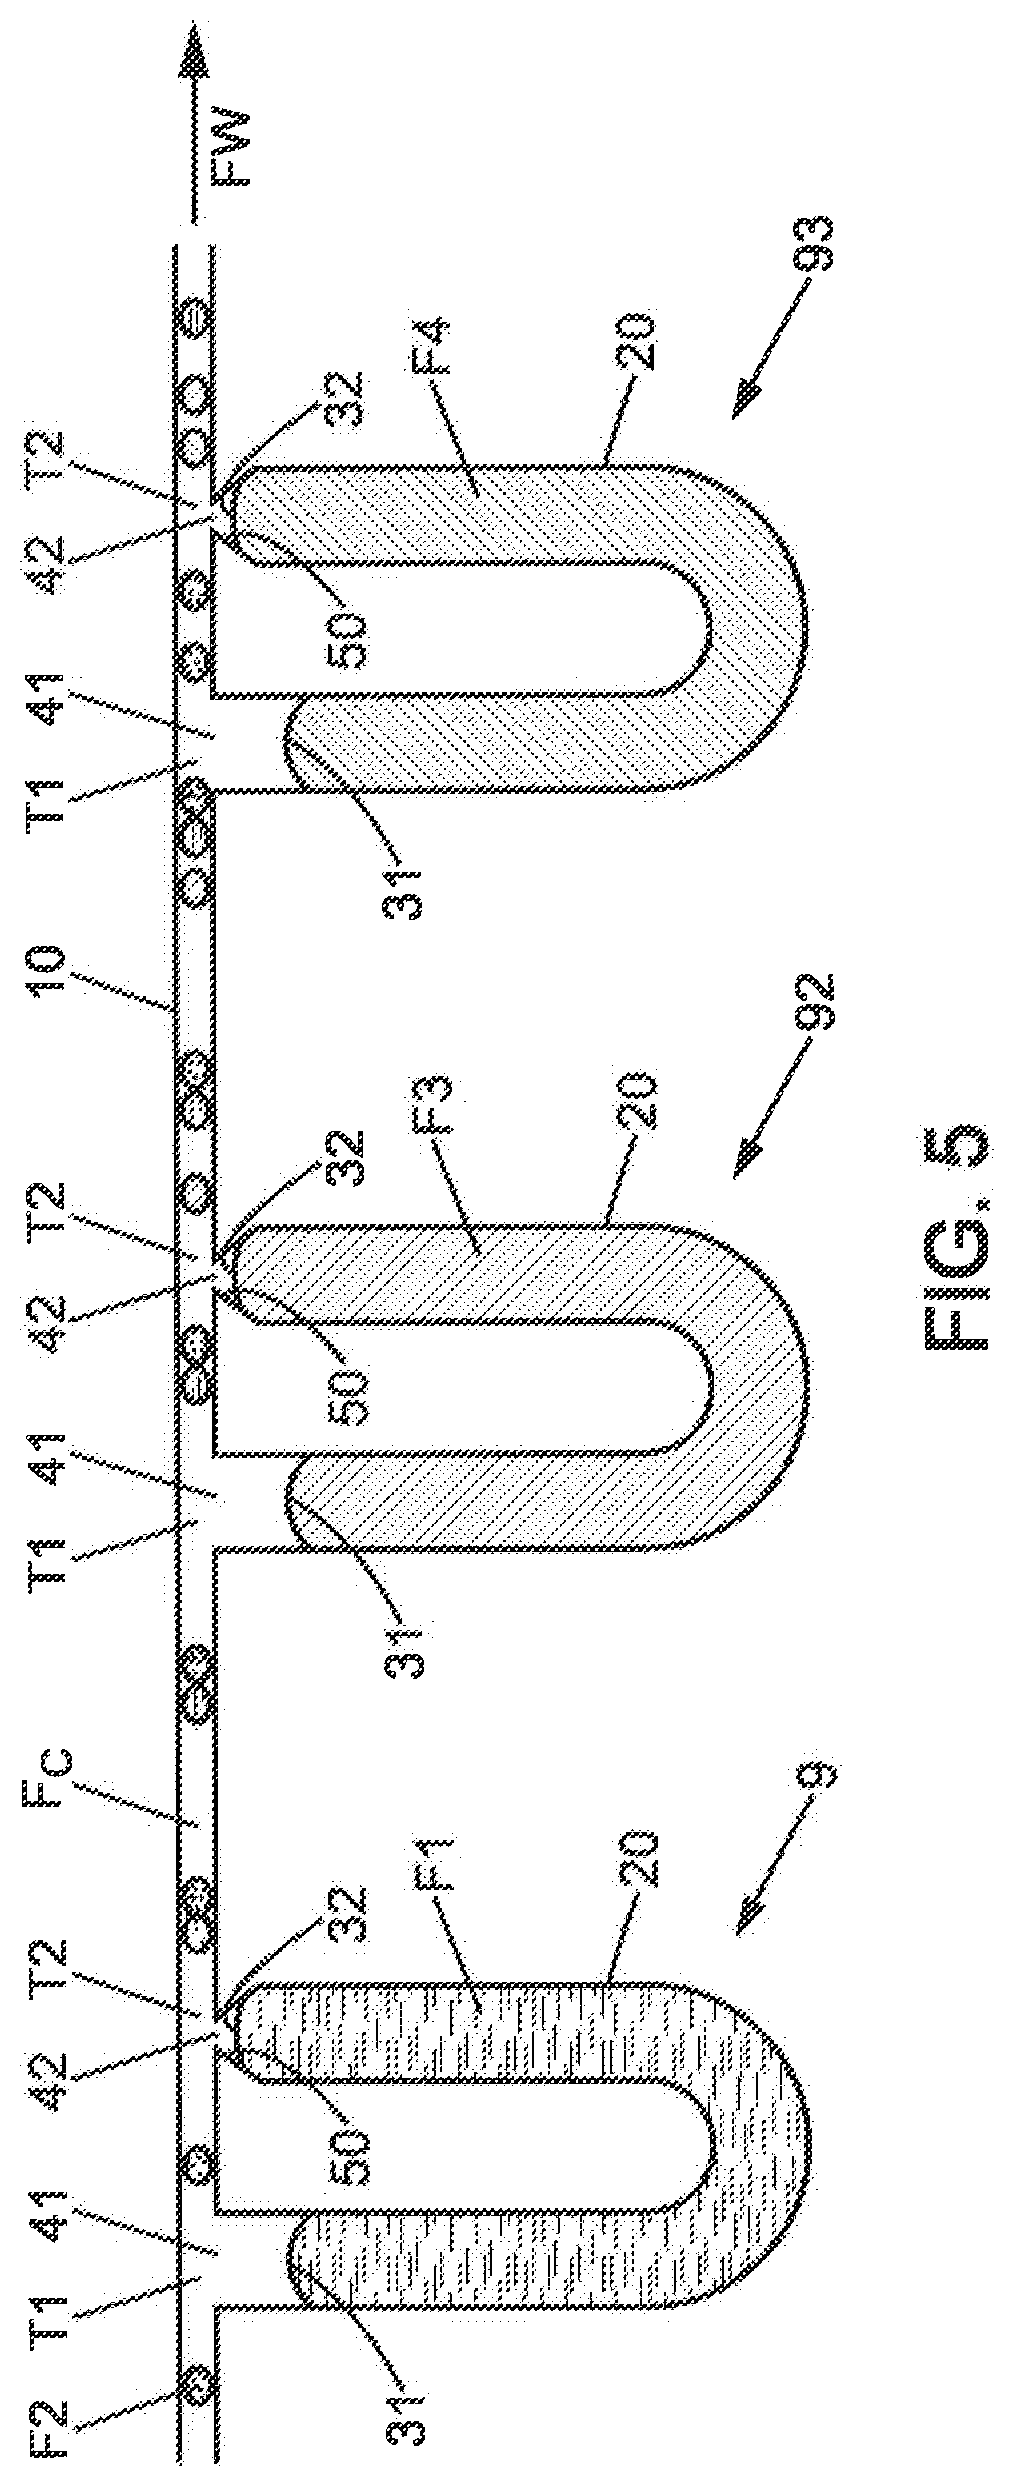 System and apparatus for injecting droplets in a microfluidic system